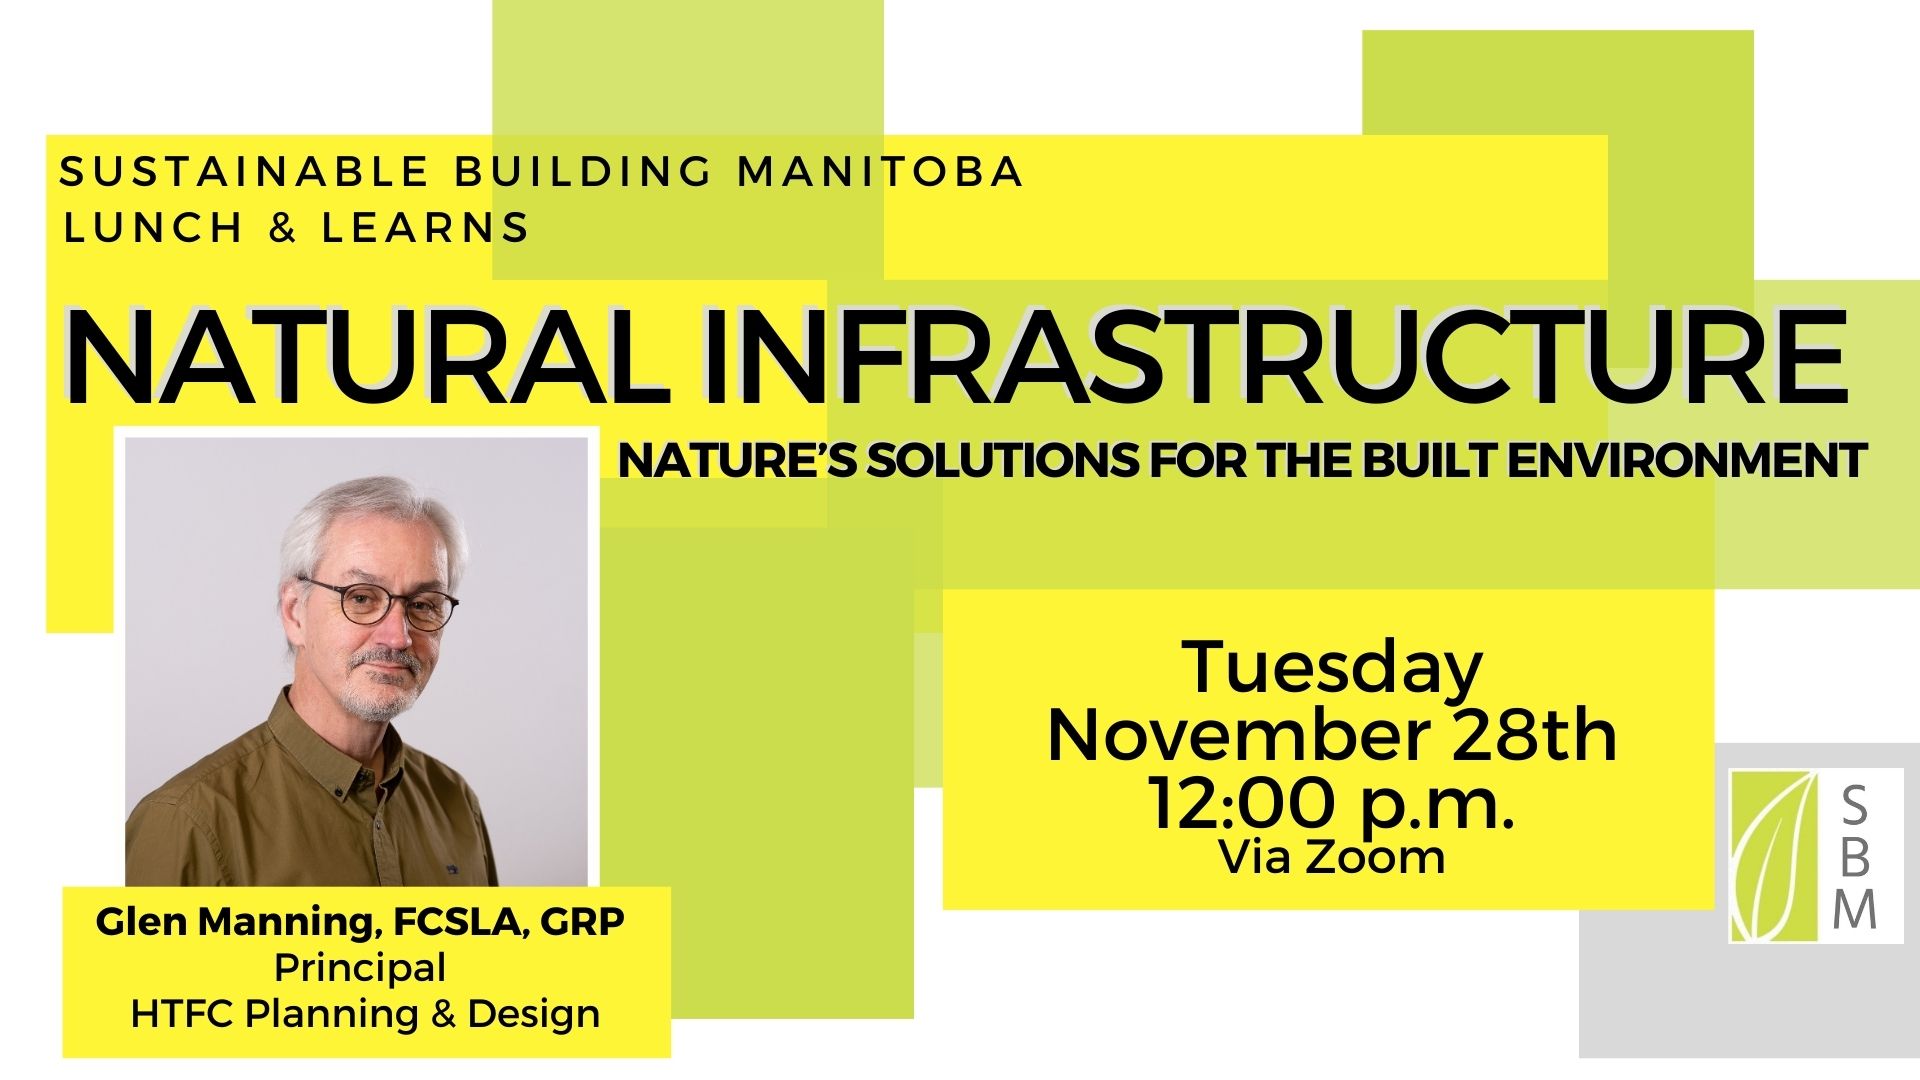 Sustainable Building Manitoba Lunch and Learns NATURAL INFRASTRUCTURE Nature's solutions for the built environment Tuesday November 28th 12:00PM via Zoom SPEAKER Glen Manning, FCSLA, GRP Principal HTFC Planning & Design